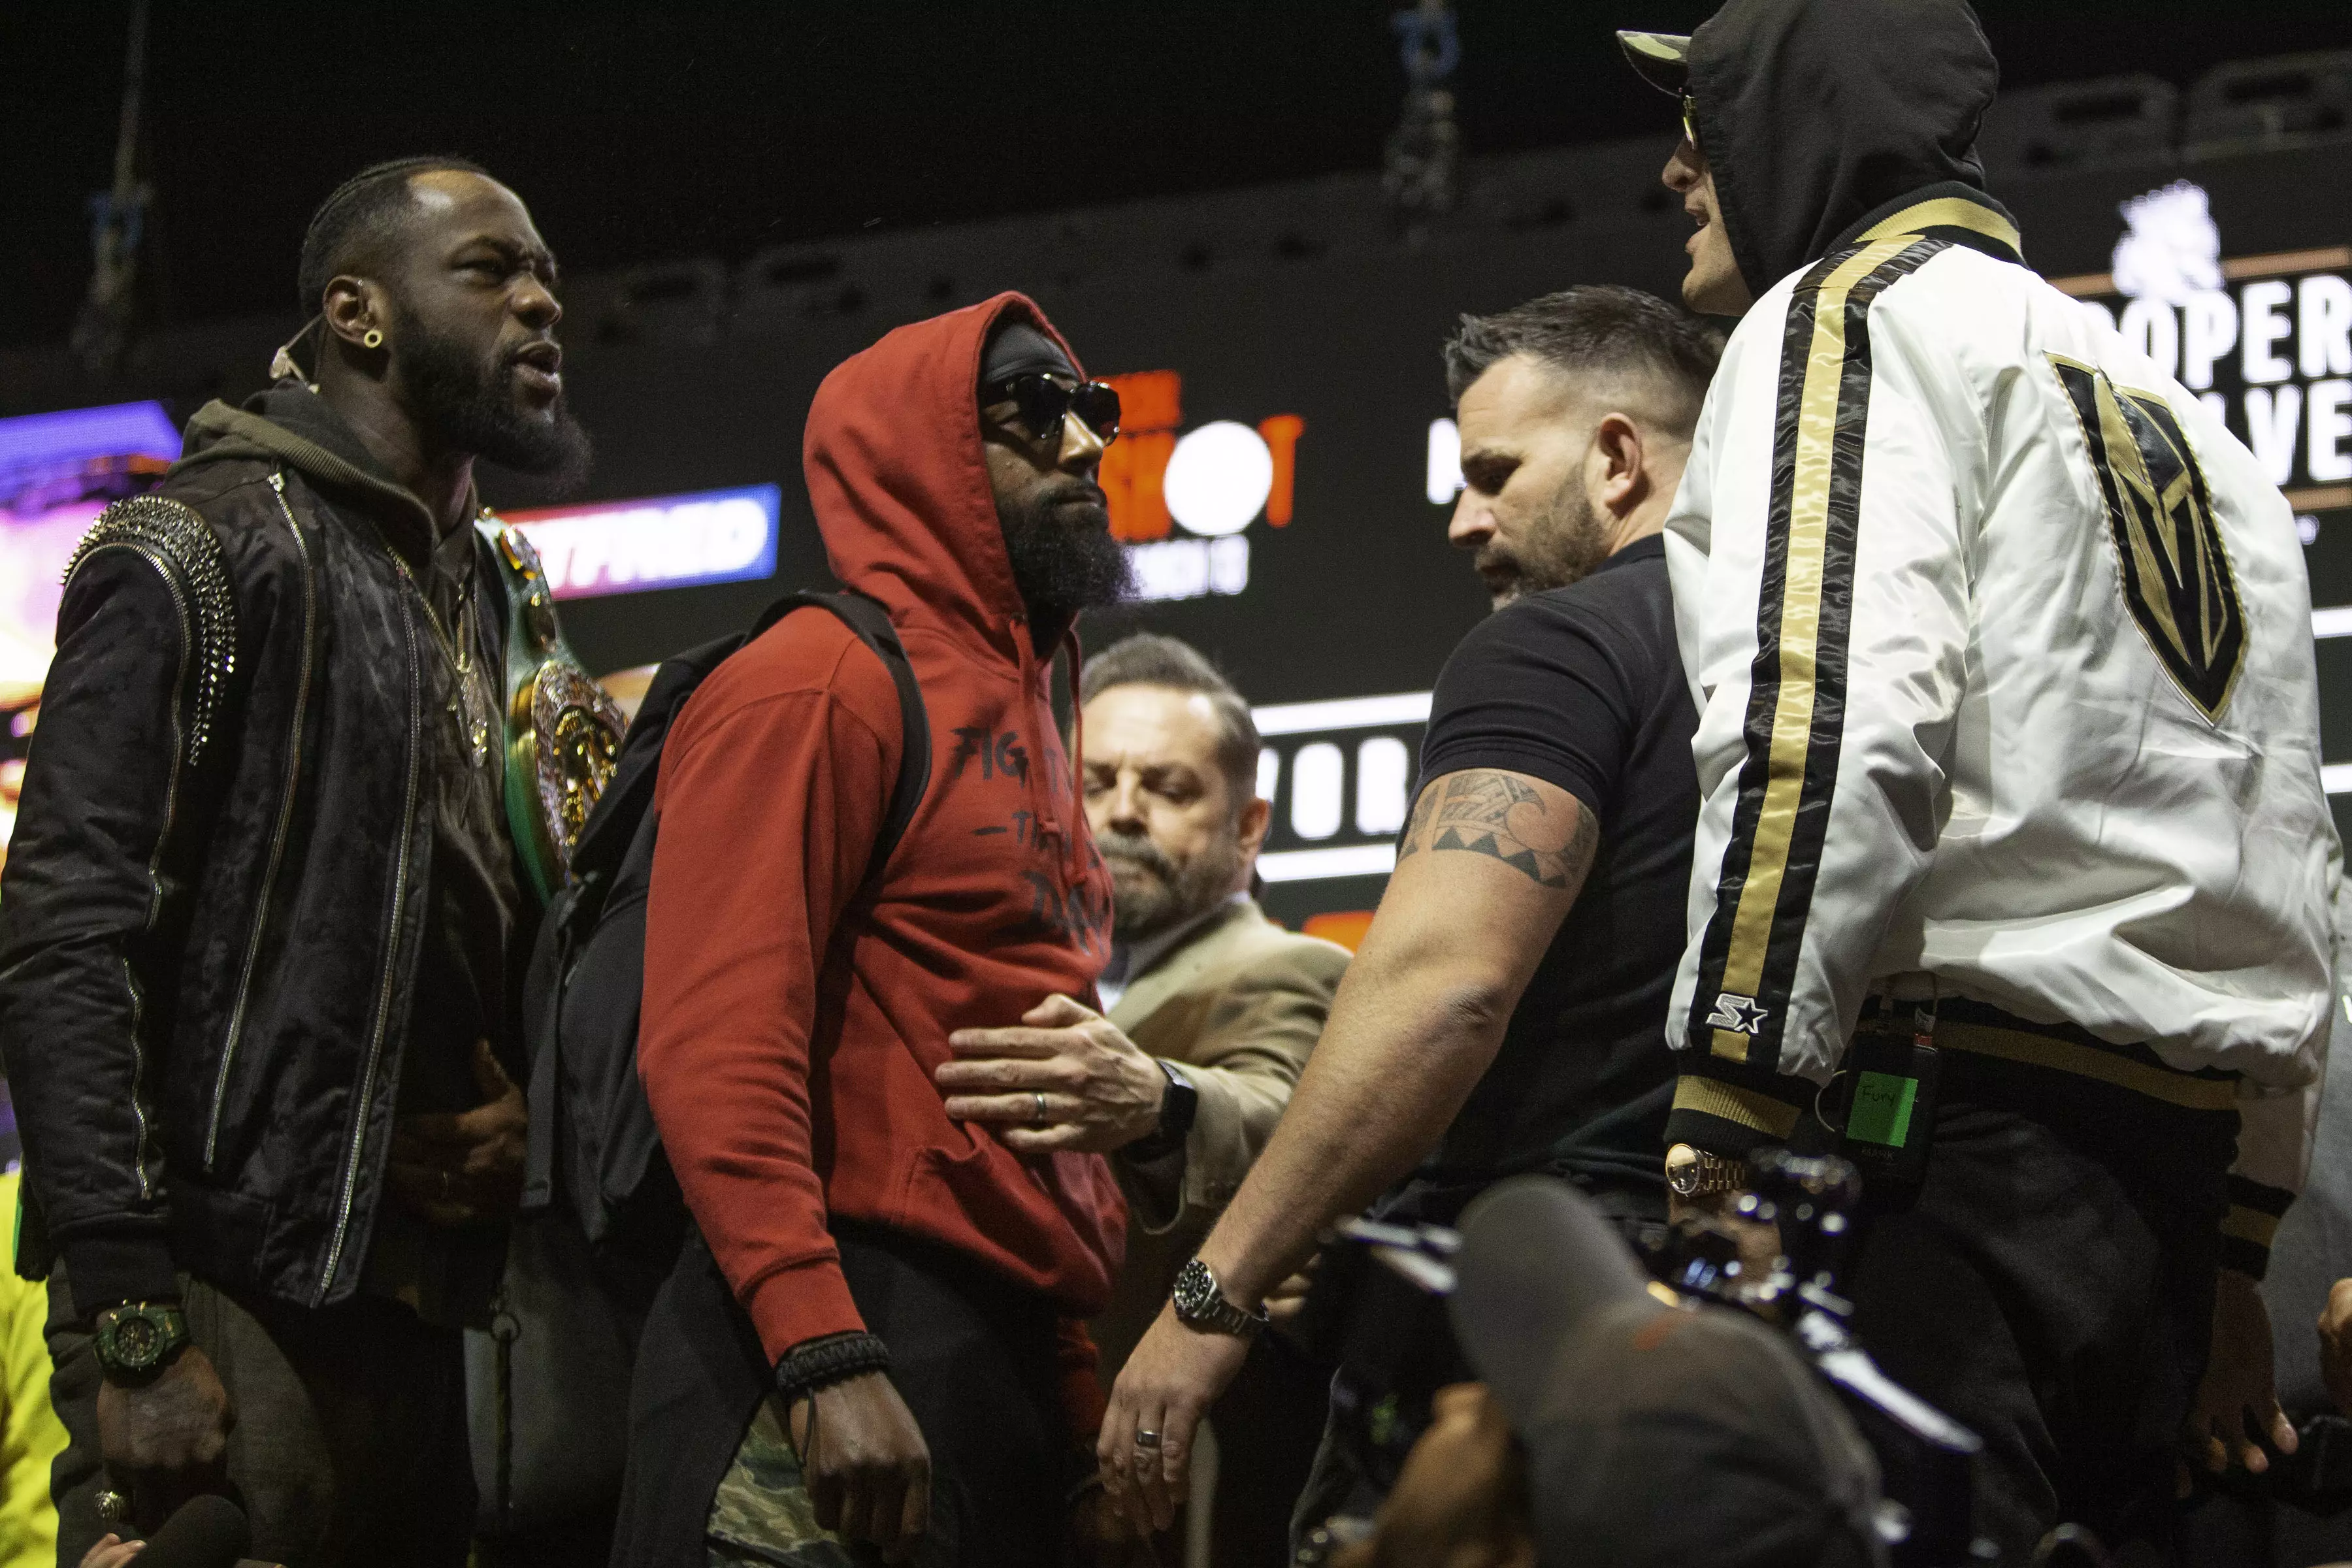 Deontay Wilder and Tyson Fury square off.